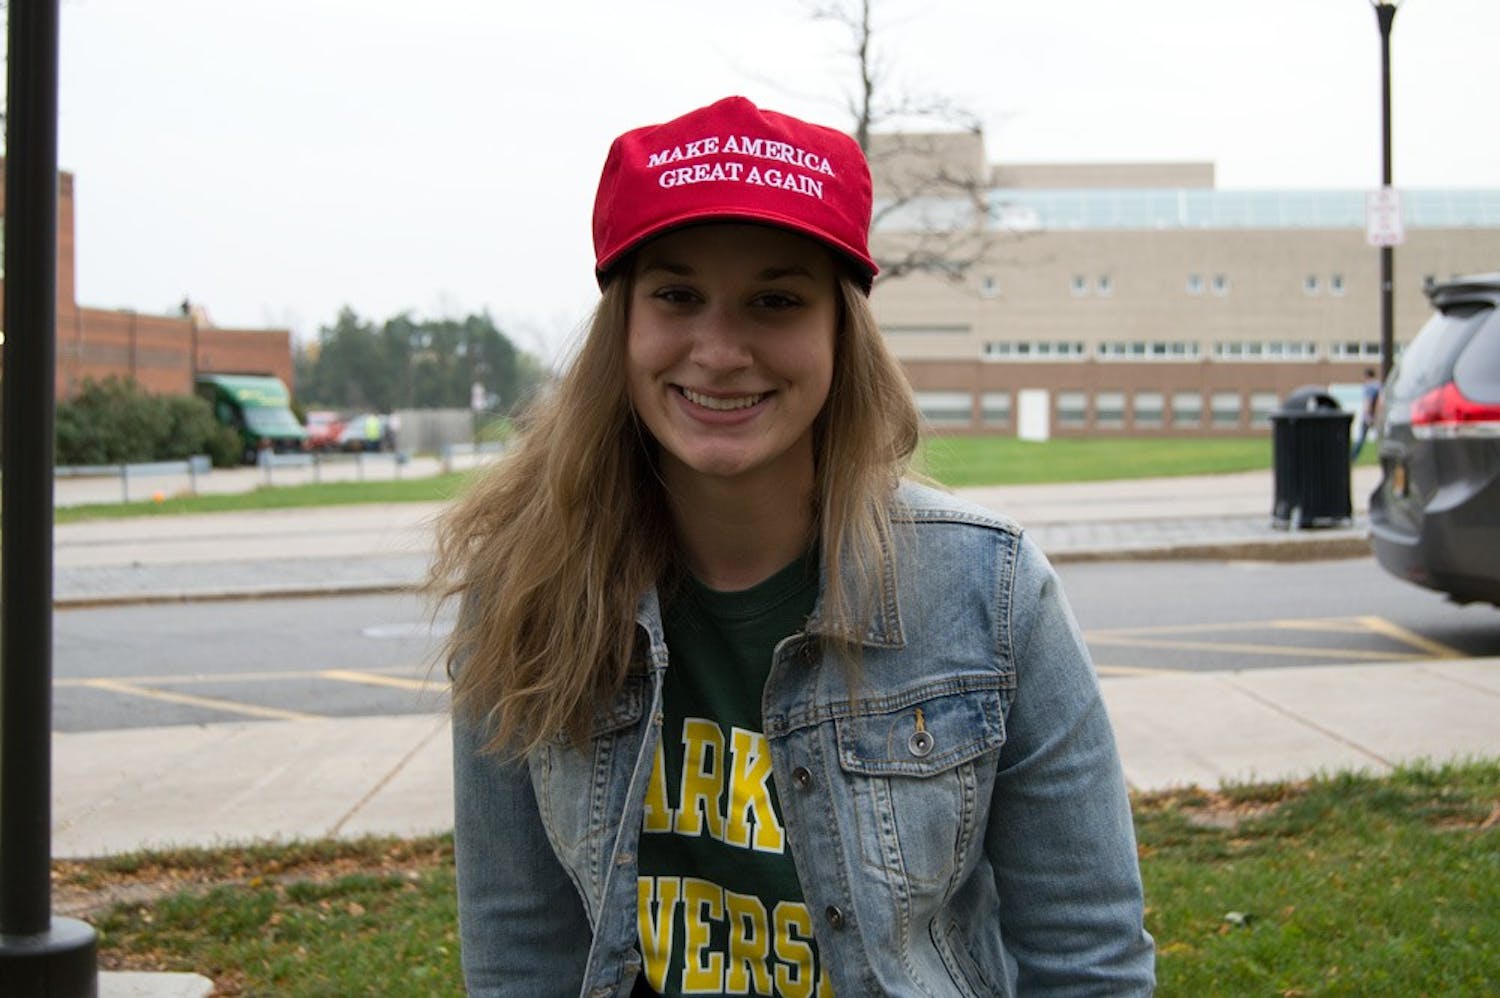 Jennie Gibson, a sophomore communication major, said she will be voting for Republican presidential candidate Donald Trump on Nov. 8. She said she will not dwell on Trump’s comments toward women but will focus on his platform.